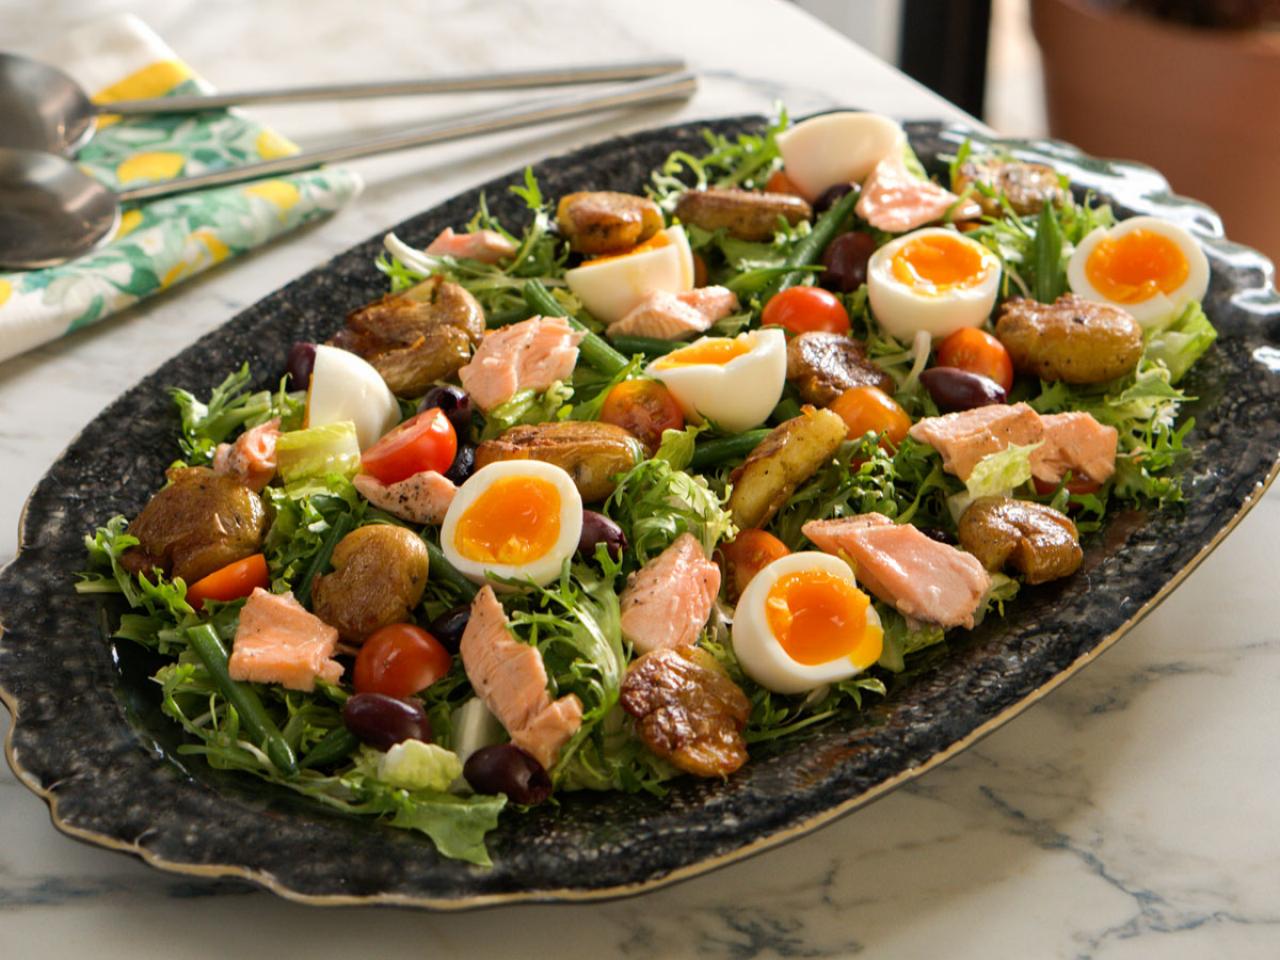 Cold-Poached Salmon Nicoise Salad with Crispy Potatoes Recipe | Valerie Bertinelli | Food Network